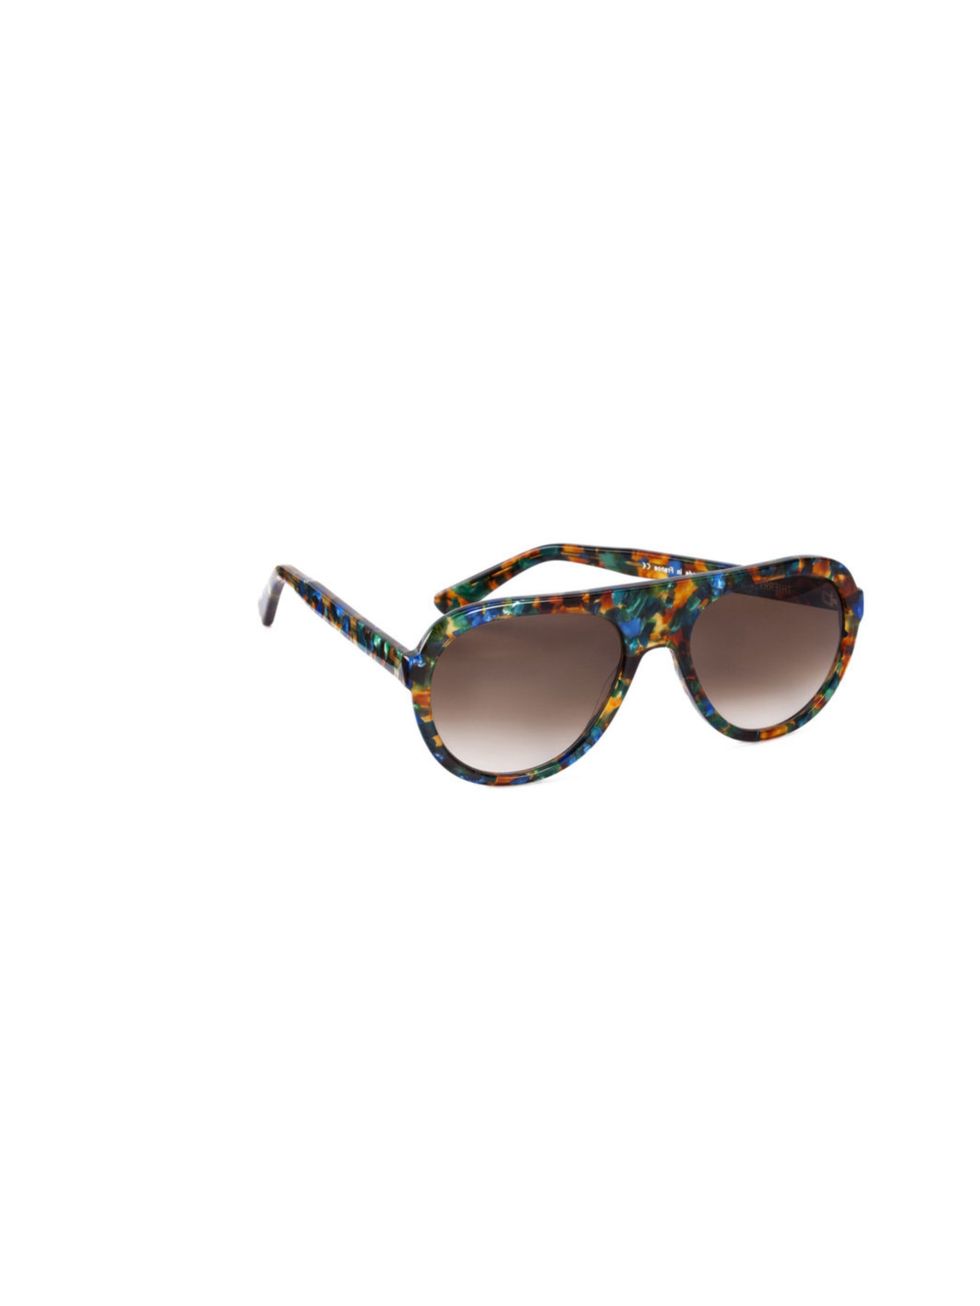 <p>Thierry Lasry multi-coloured aviator sunglasses, were £287 now £79.50, at <a href="http://www.brandalley.co.uk/">Brand Alley</a></p>